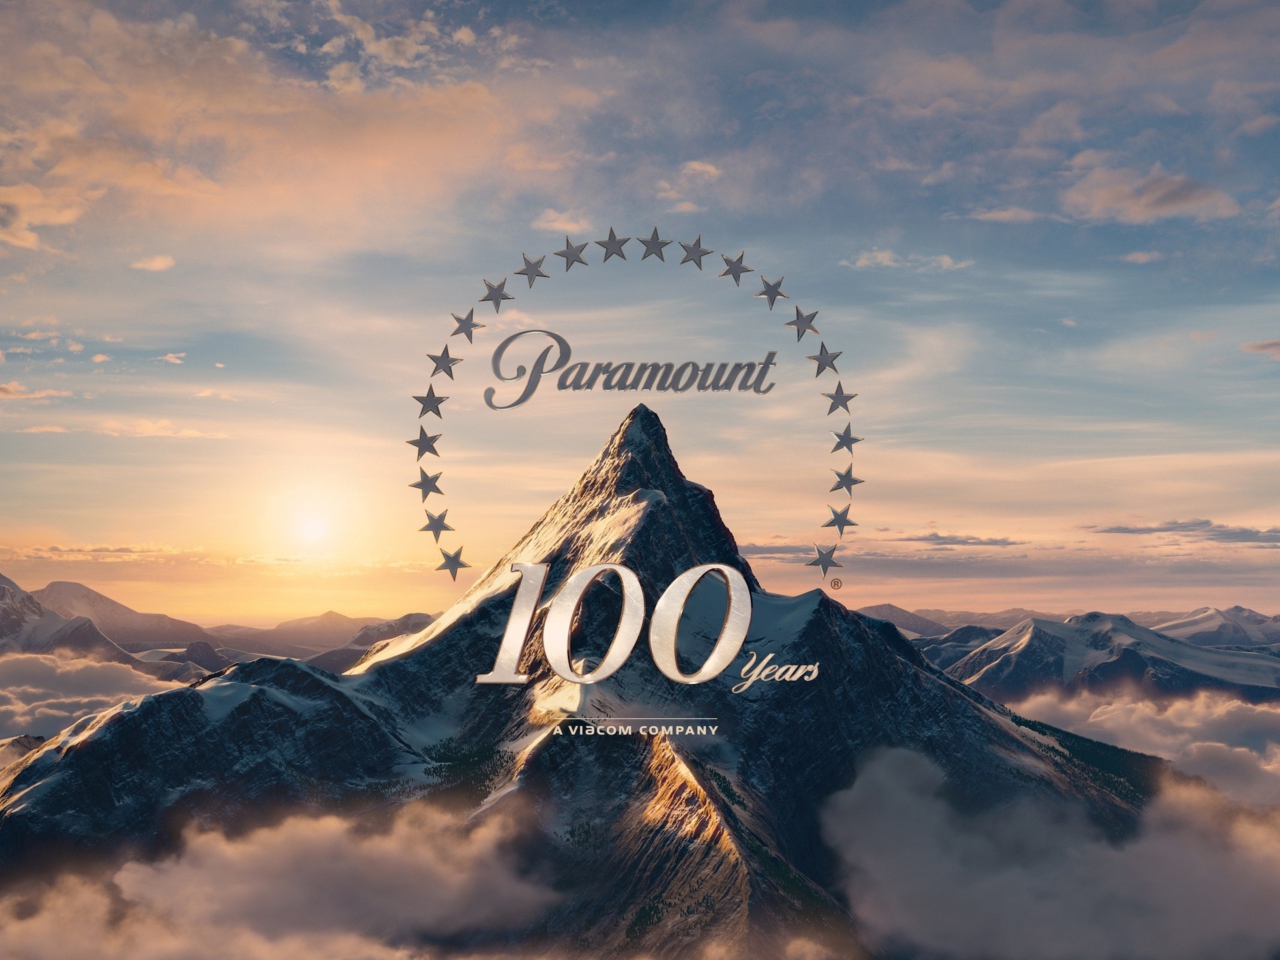 Paramount Pictures 100 Years screenshot #1 1280x960